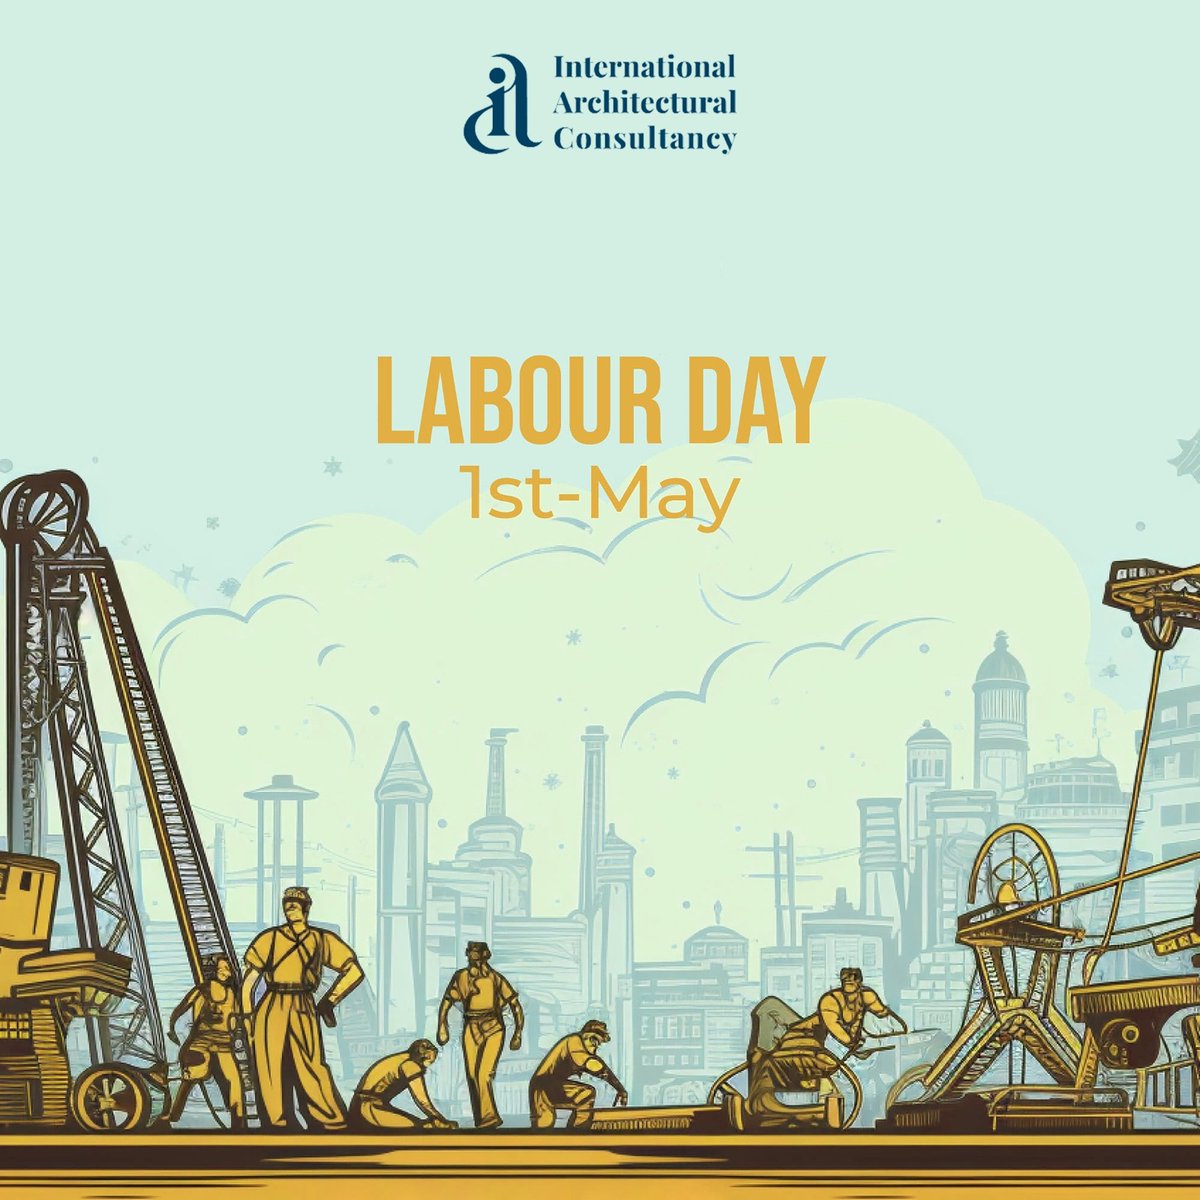 𝗜𝗻𝘁𝗲𝗿𝗻𝗮𝘁𝗶𝗼𝗻𝗮𝗹 𝗟𝗮𝗯𝗼𝘂𝗿 𝗗𝗮𝘆!
To all hardworking employees: And a special shout out to those who work hard to protect workers’ rights. Thank you all for making our world a better place to live and work in.

iarchcon.com

#1stmay #labourday #holiday